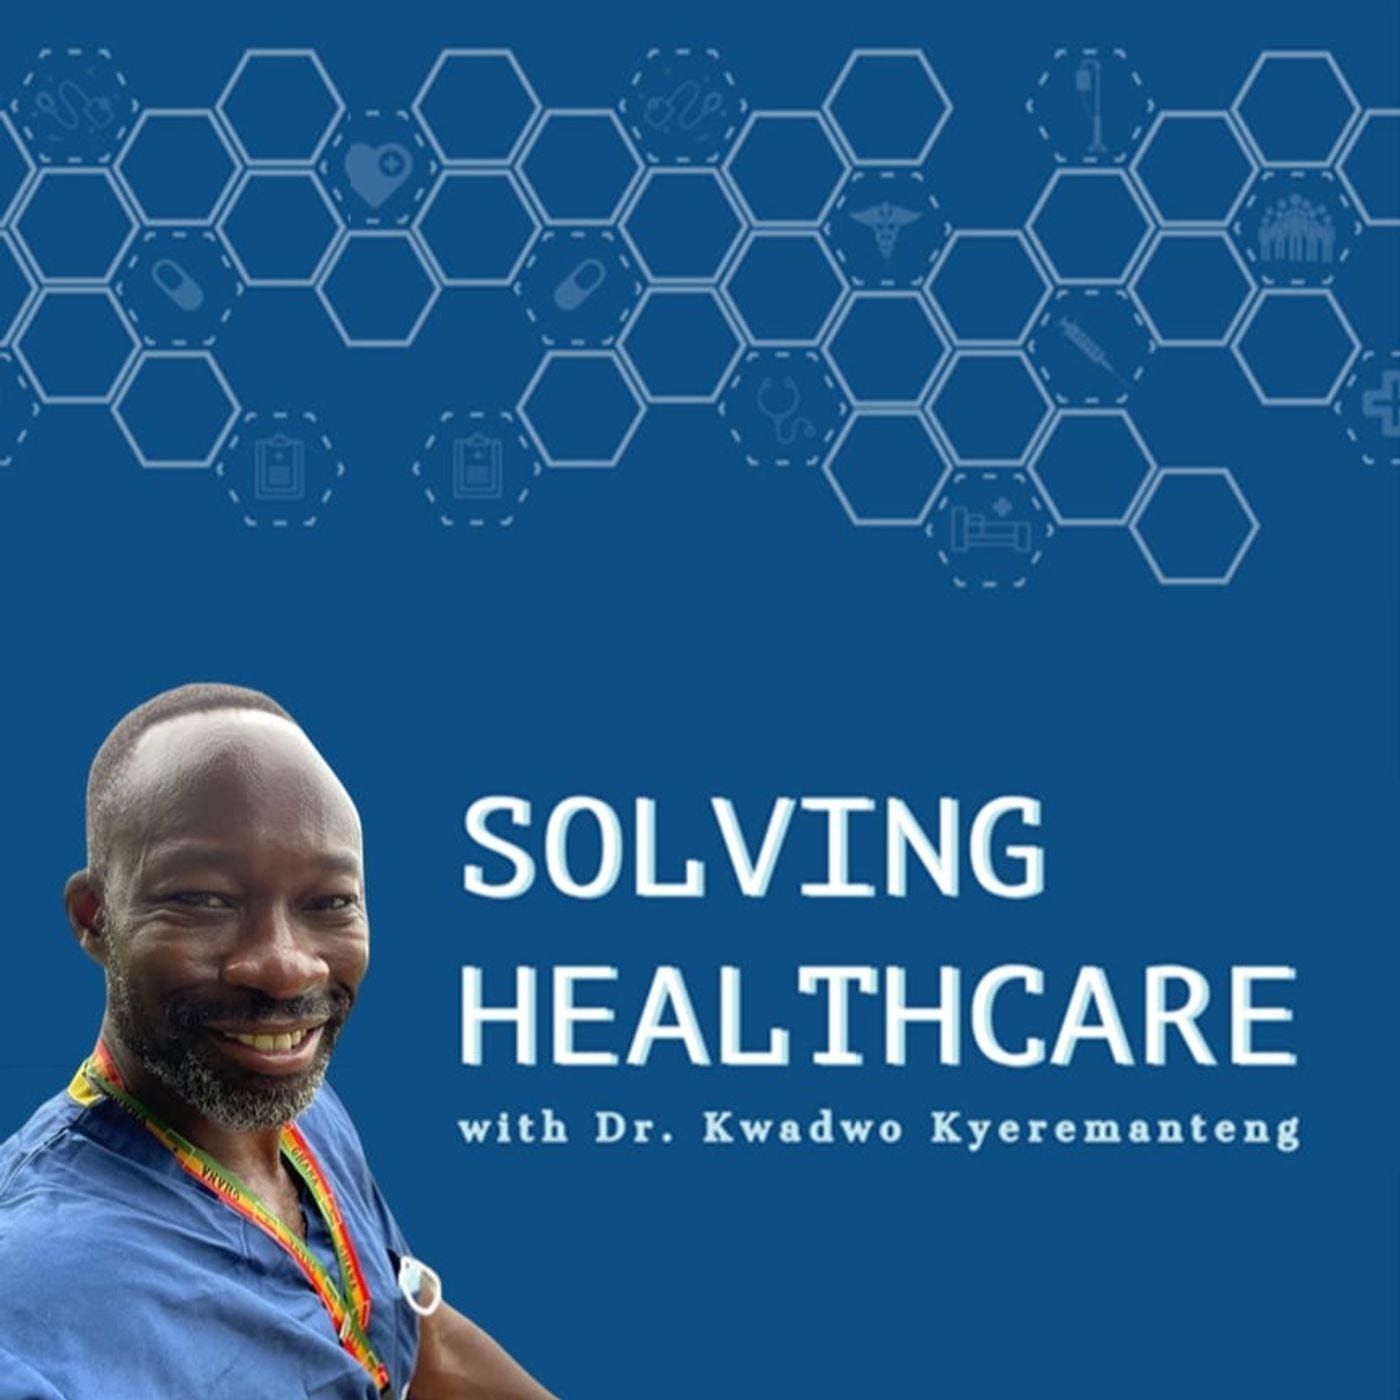 What’s this all about? Intro to Solving Healthcare